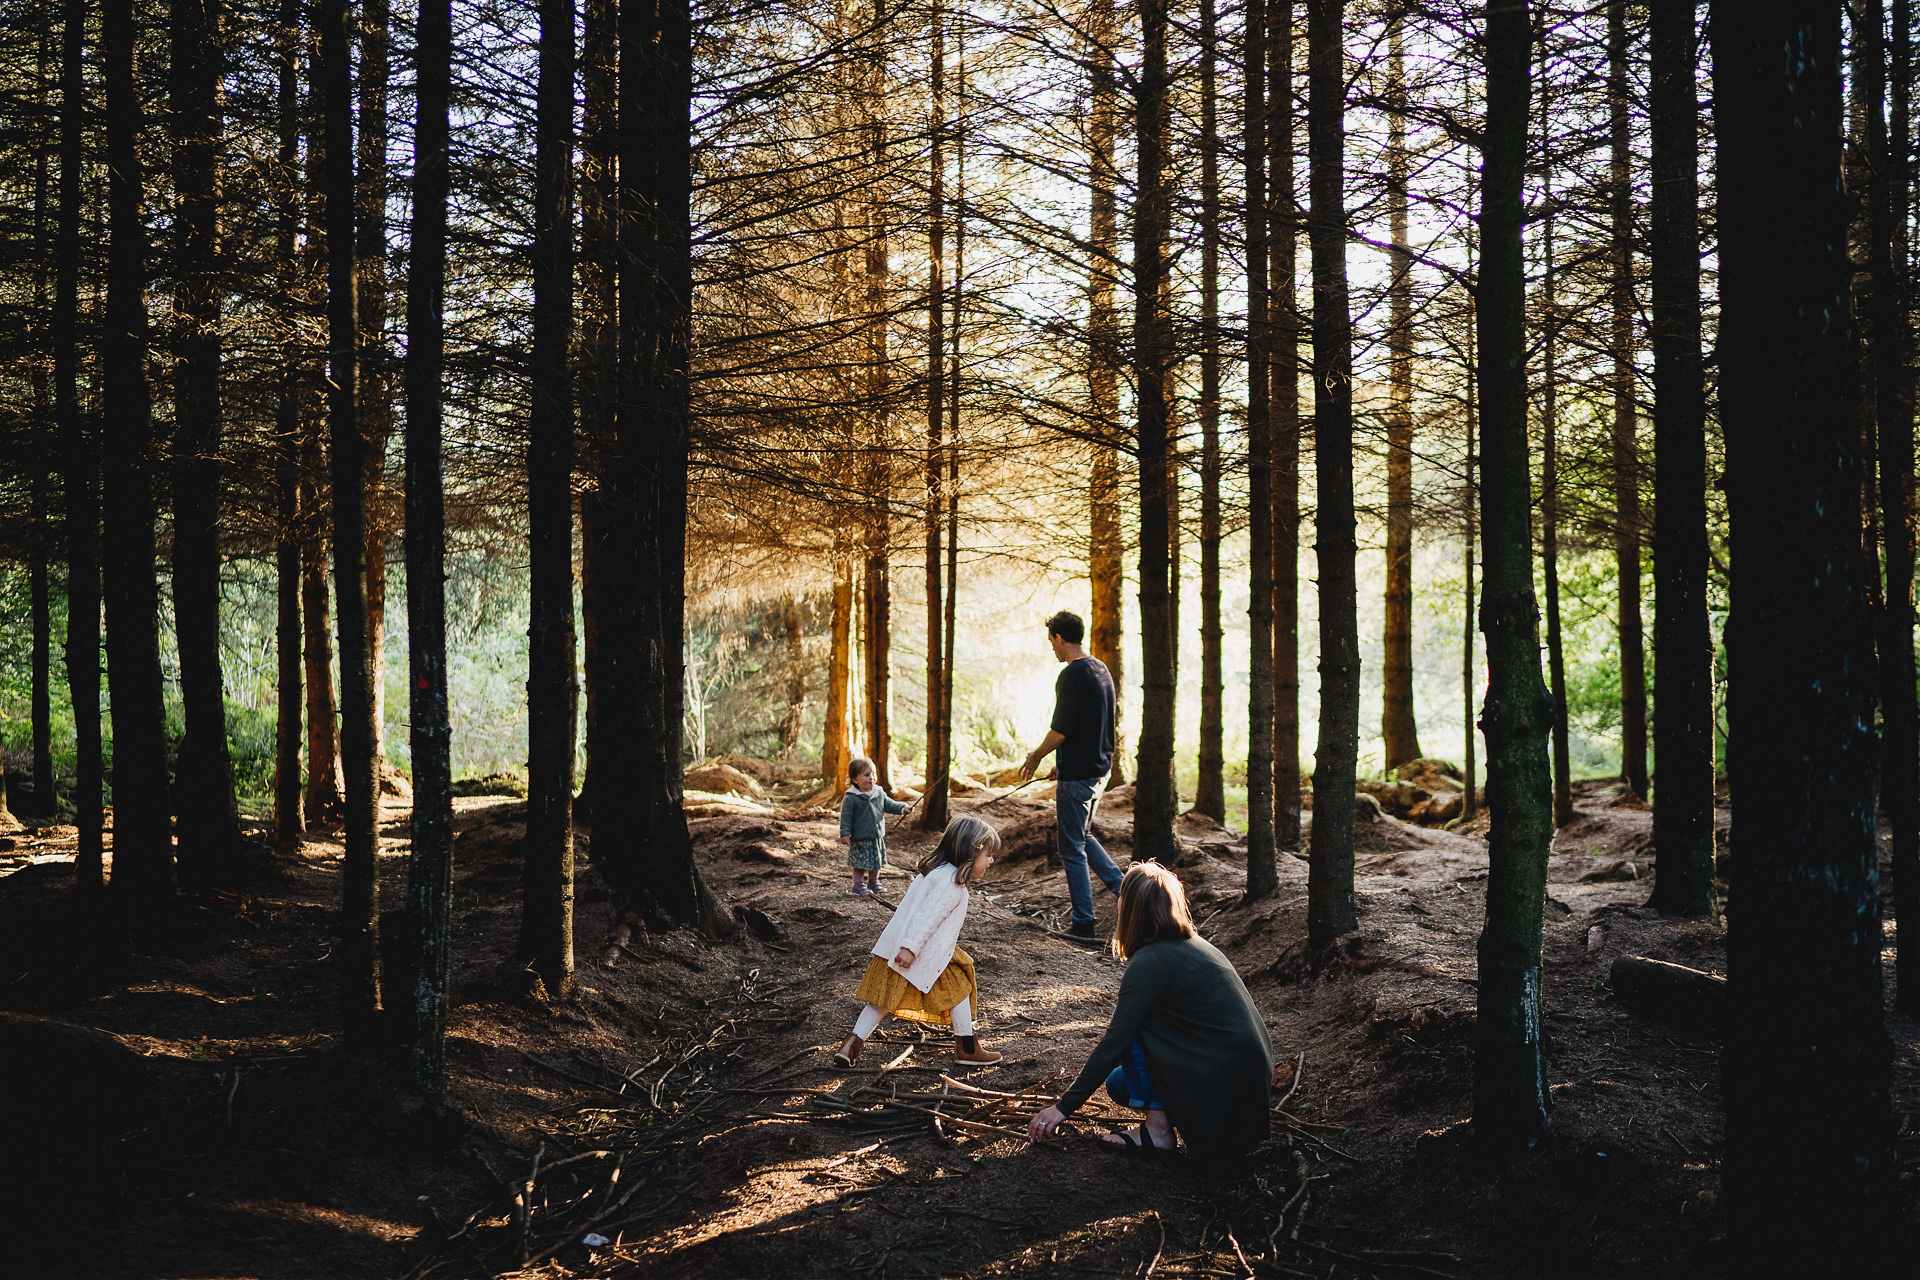 Best Devon family photography image of a family playing in woods together